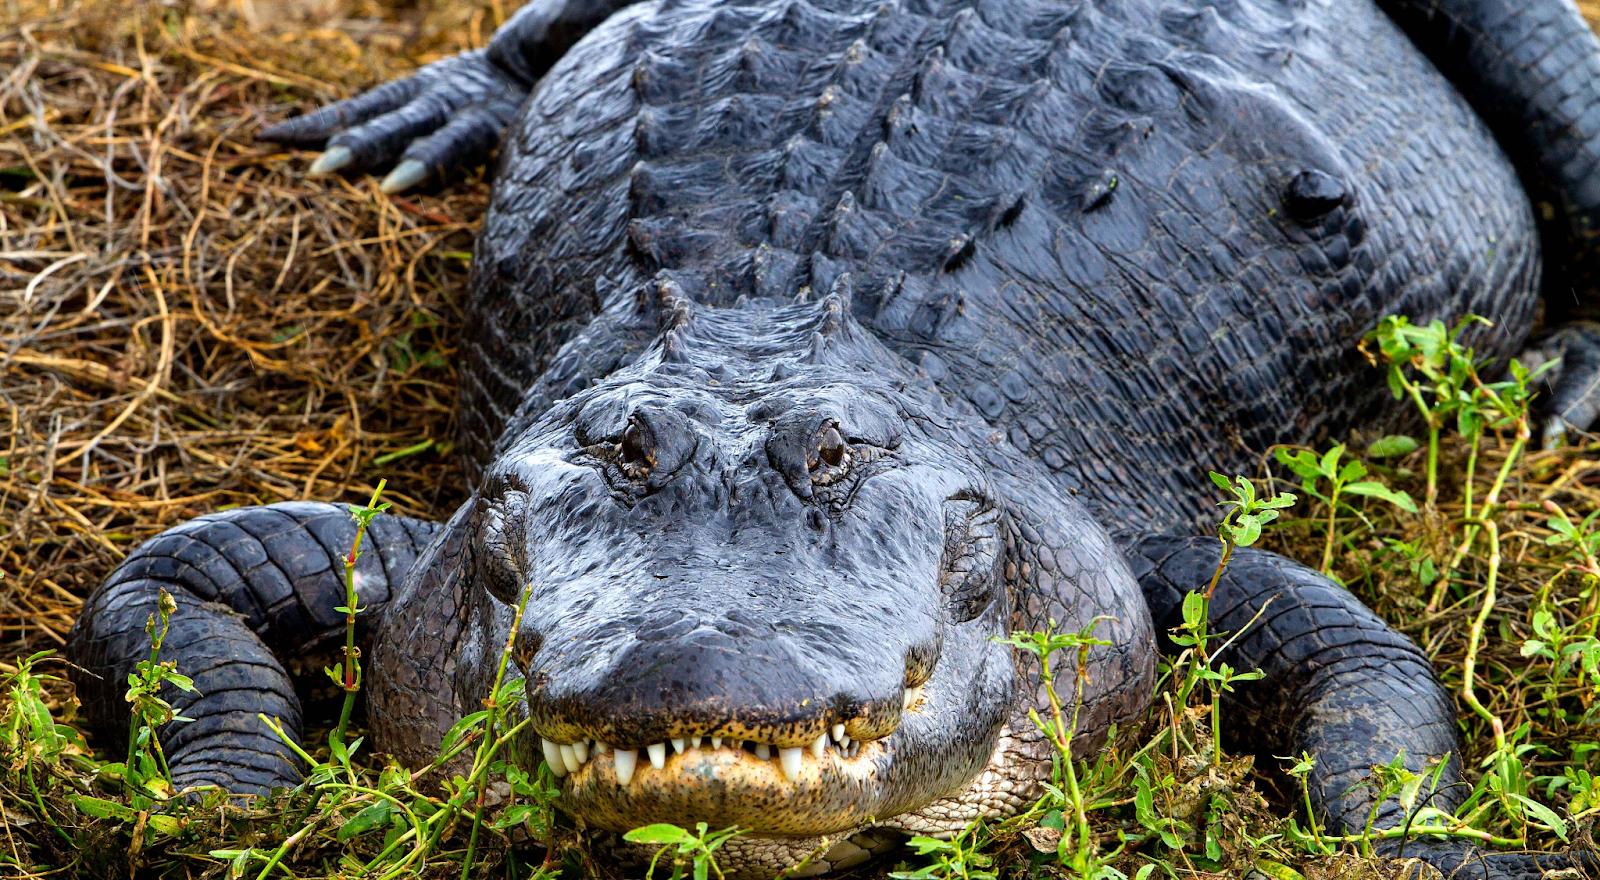 What's the Chilling Secret of Alligators in Winter?